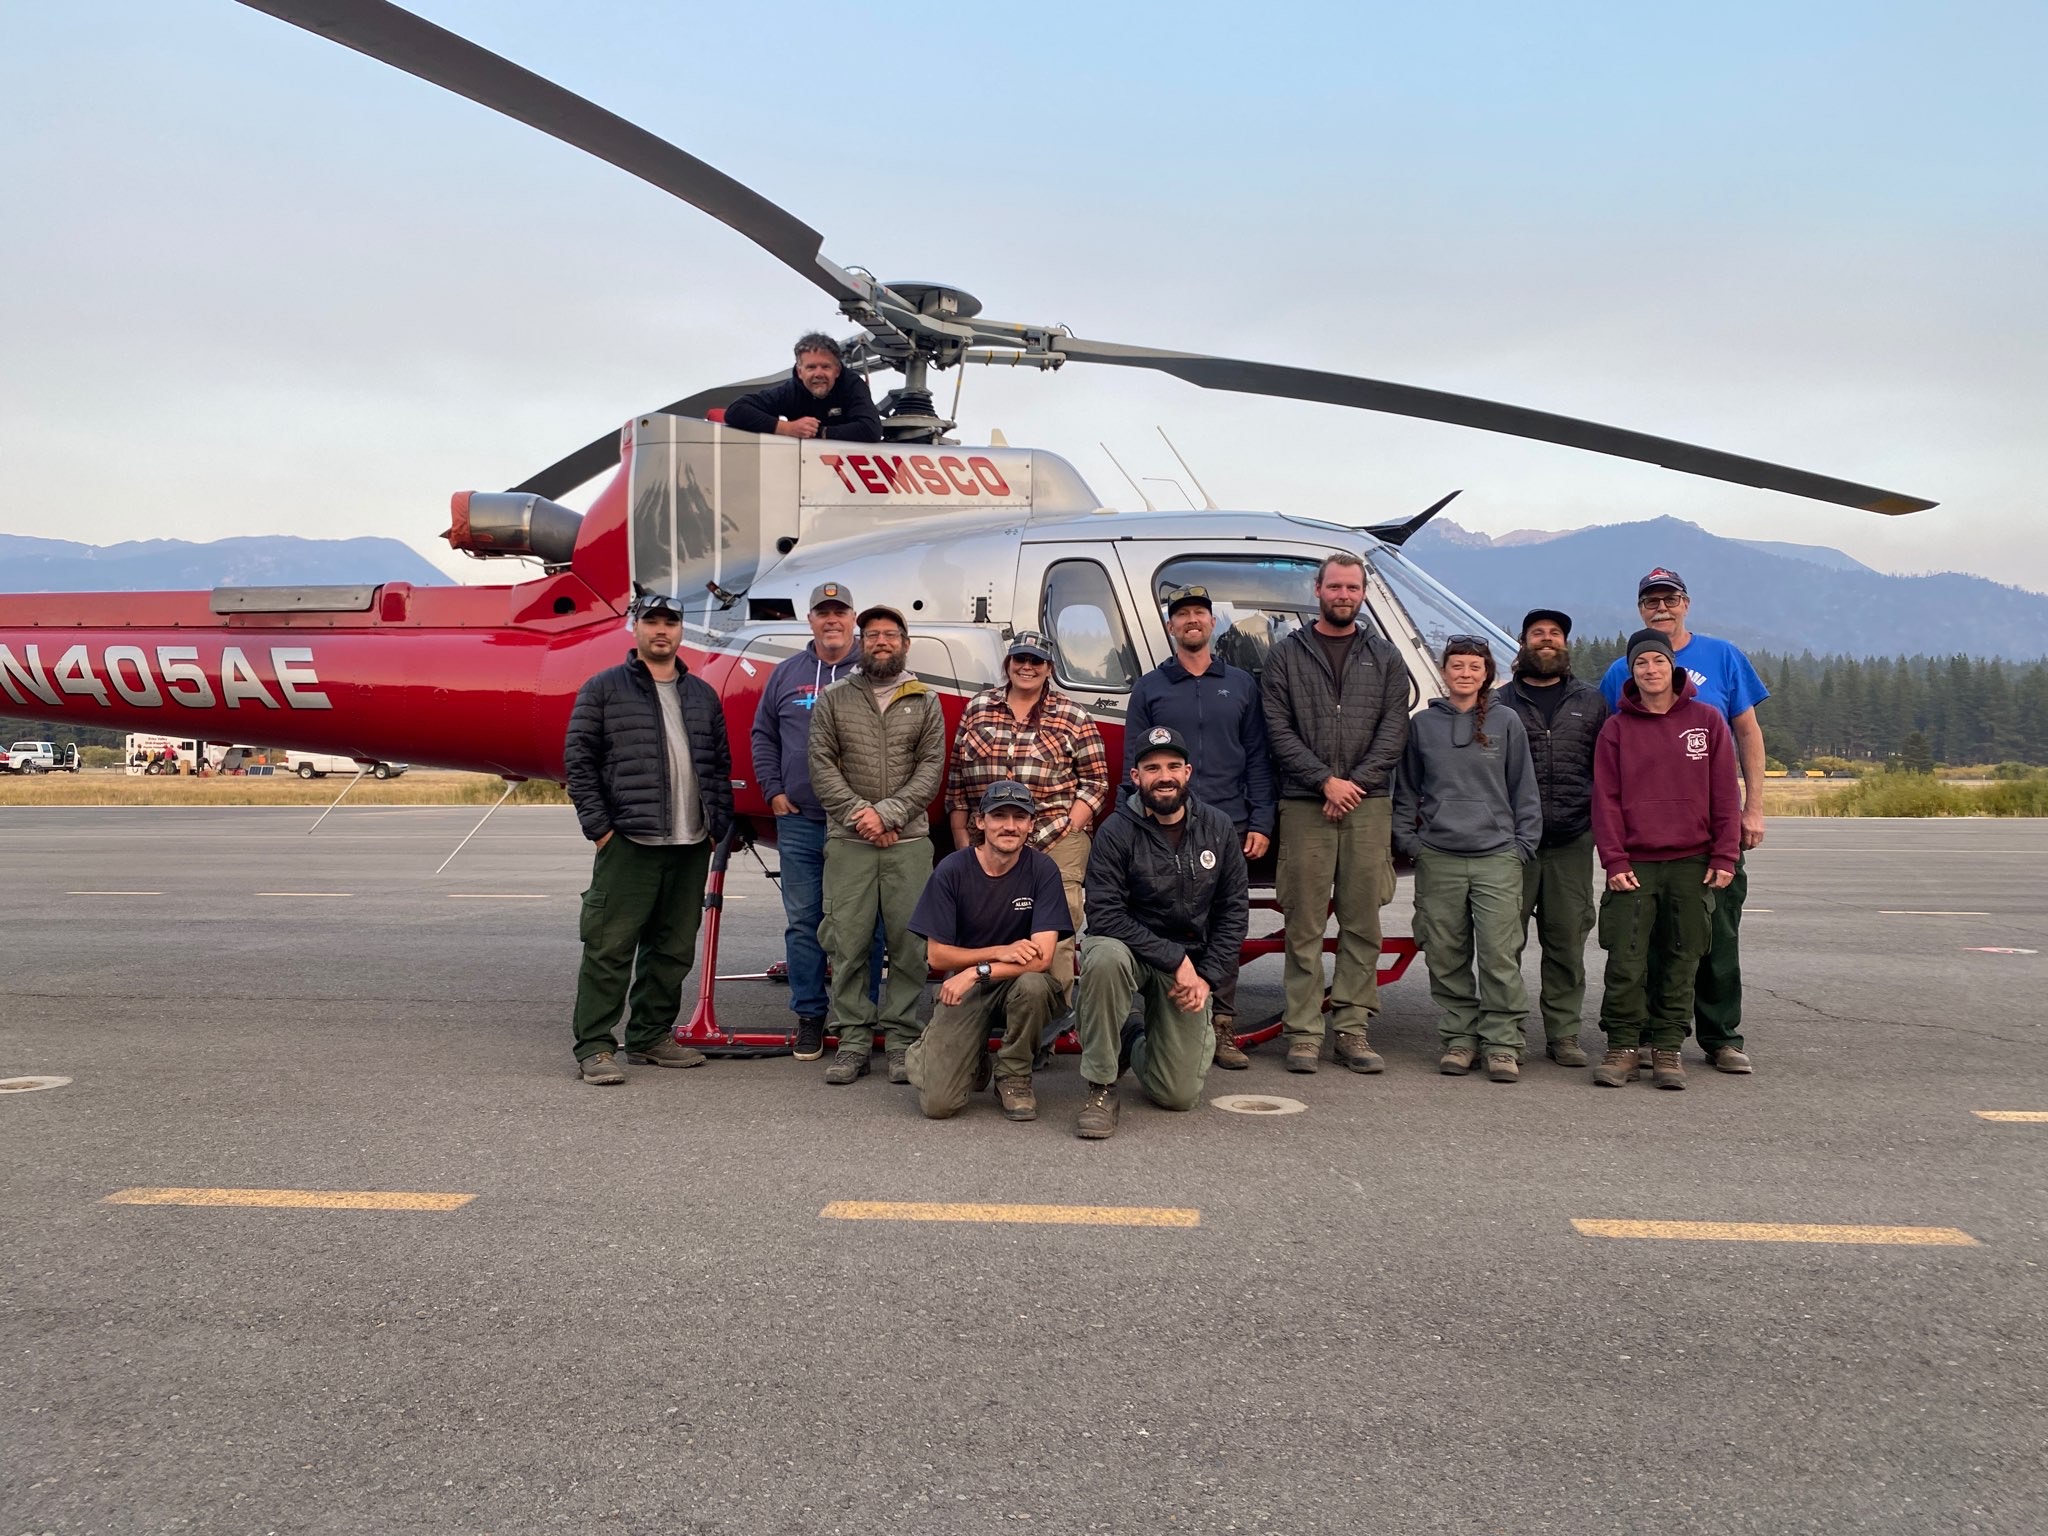 Helicopter module featuring an AFS/BLM helicopter with BLM, Forest Service and Park service crew.